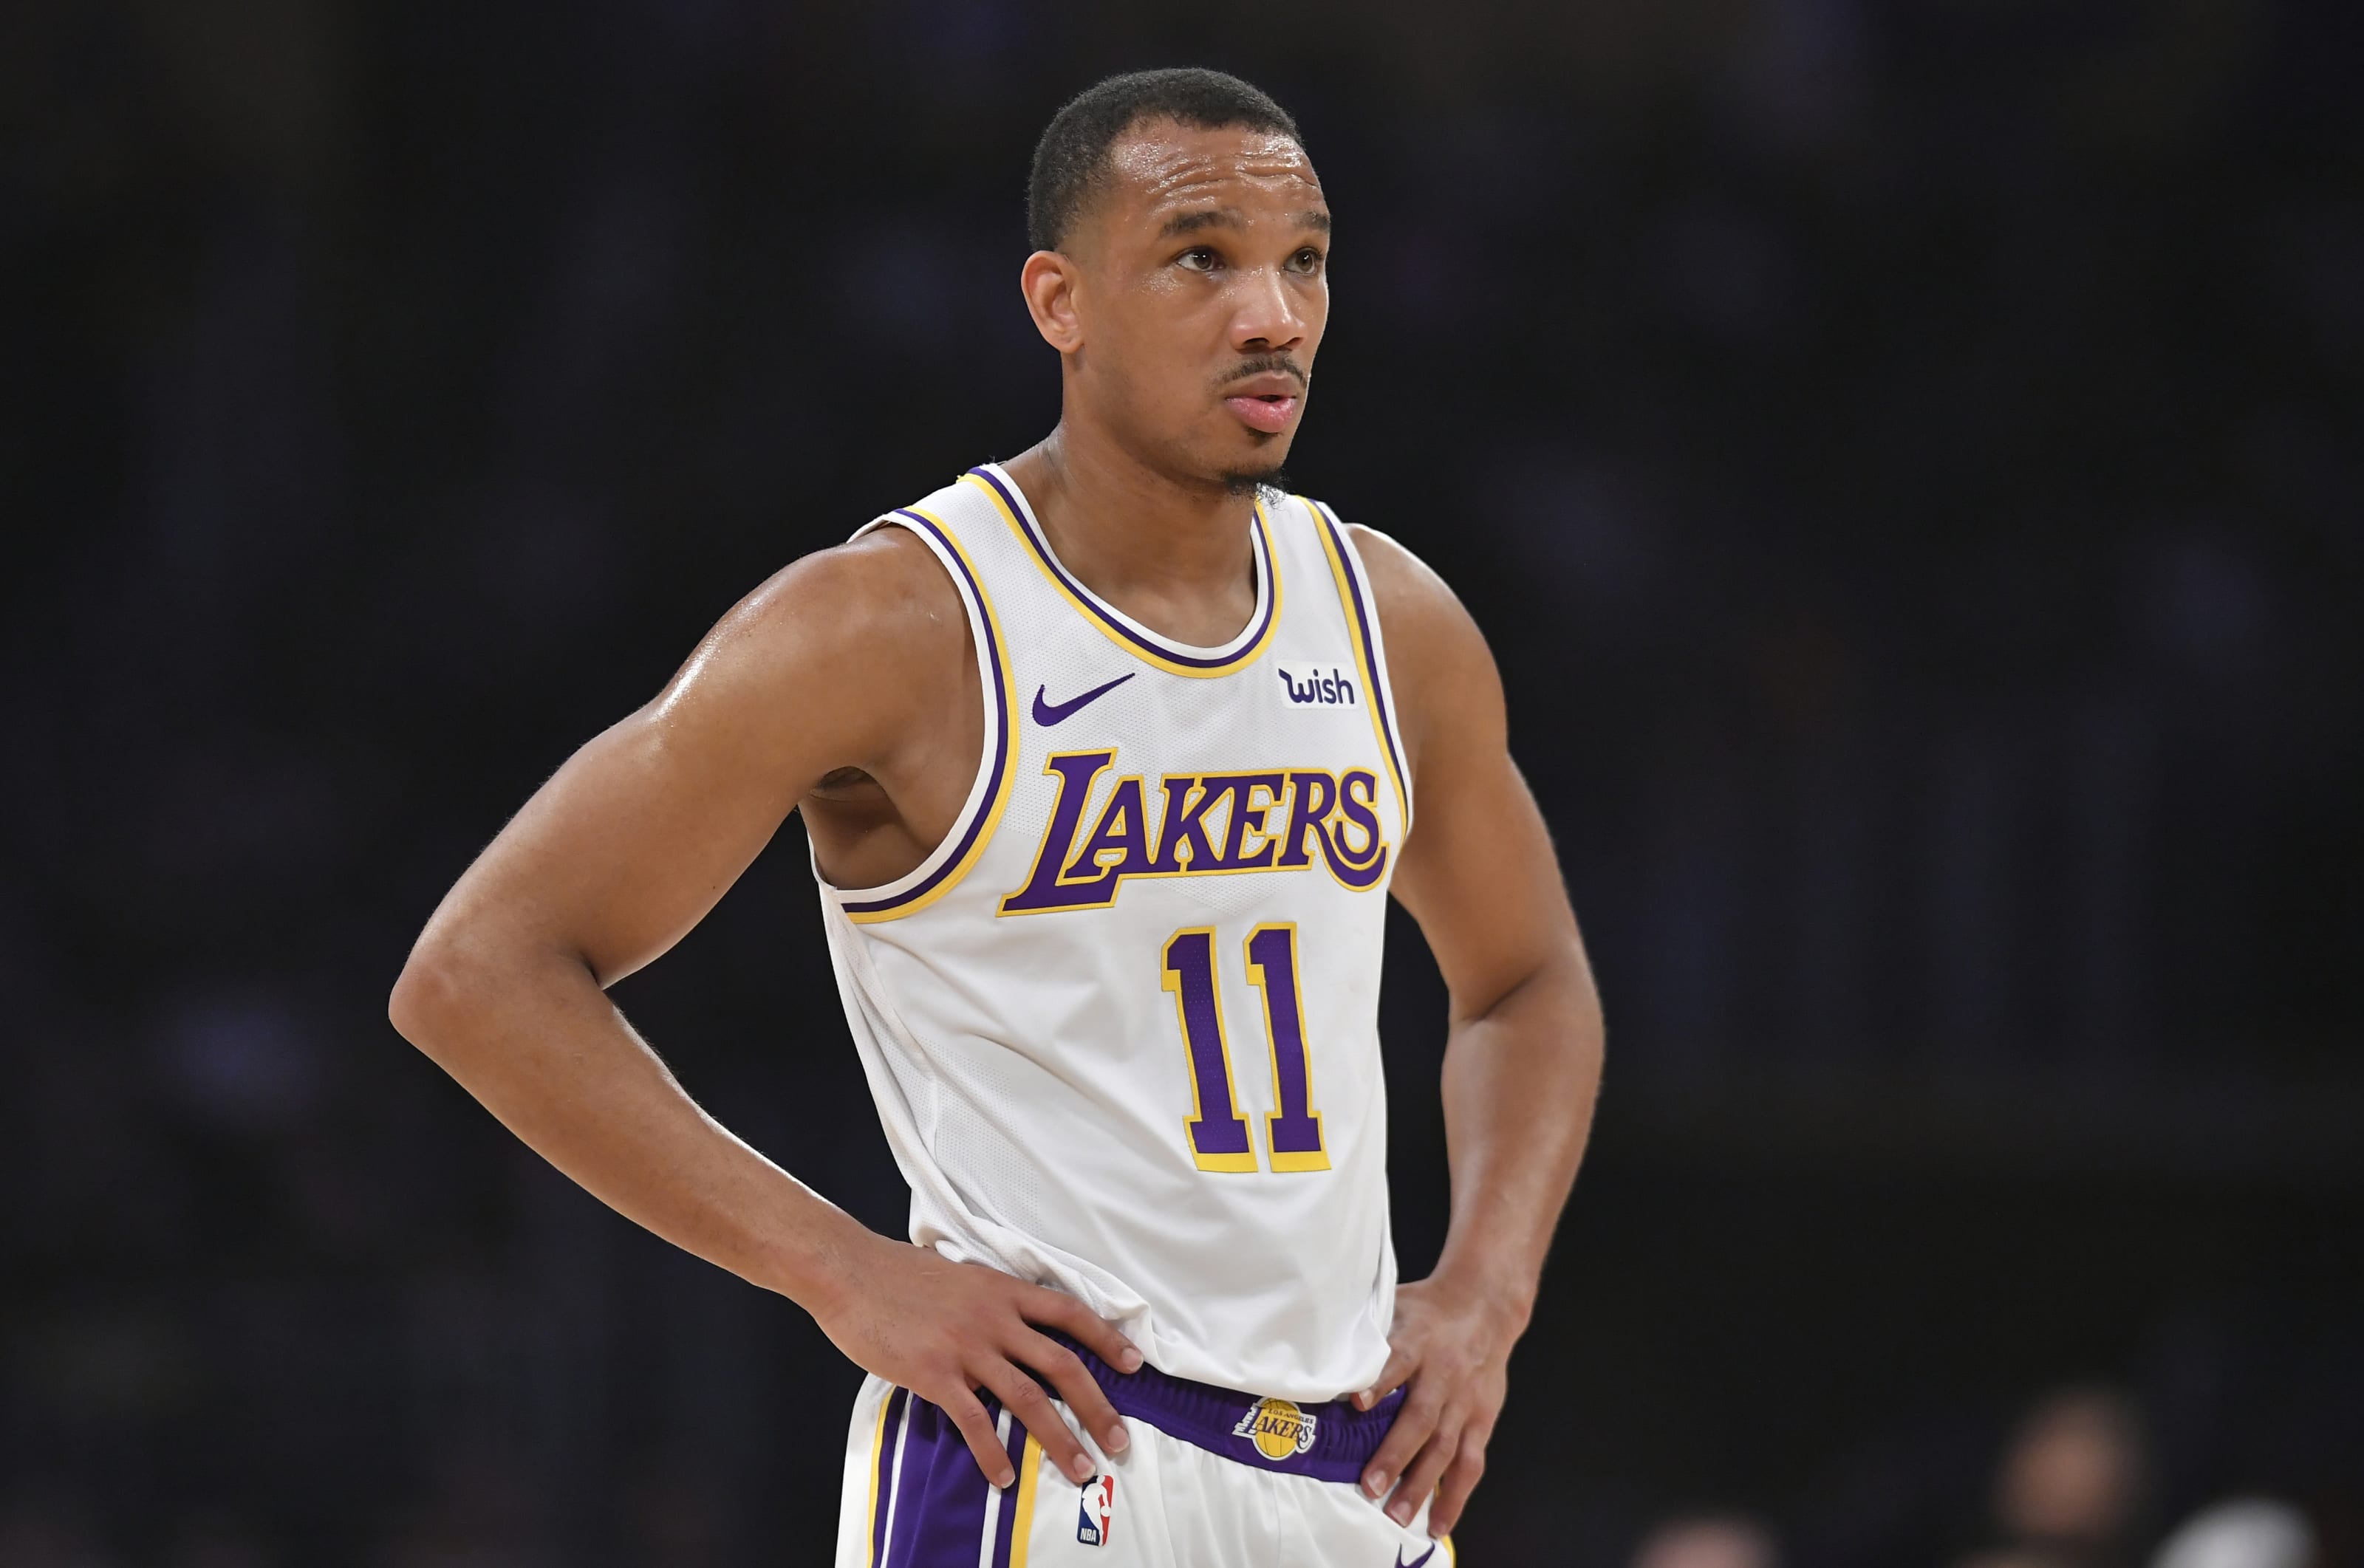 Lakers claim Avery Bradley, who opted out before title win